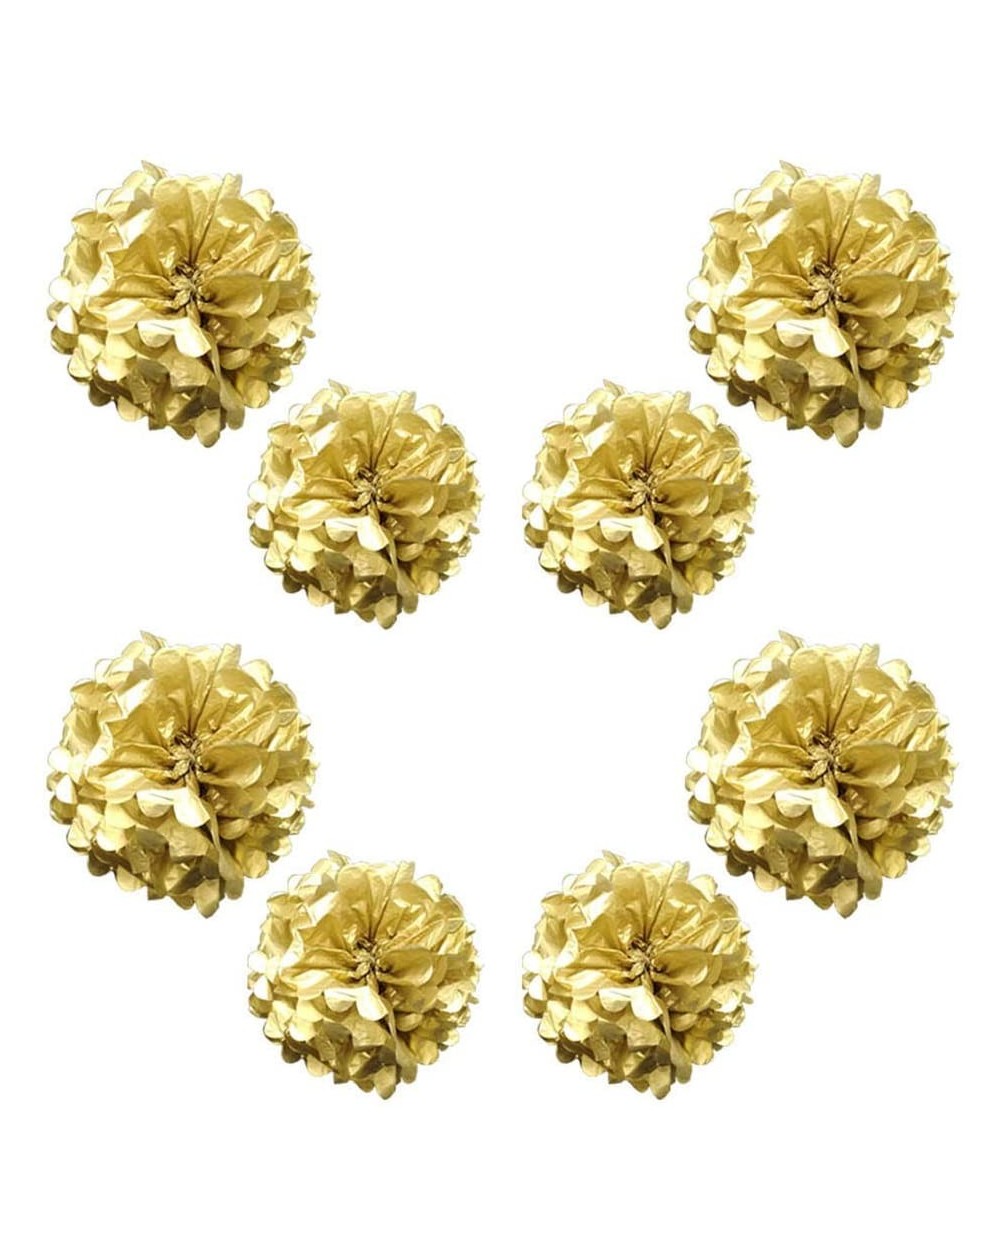 Tissue Pom Poms Gold Paper Pom Poms - Party Tissue Paper Flowers Balls - Party Hanging Decoration Supplies - Size of 10inch- ...